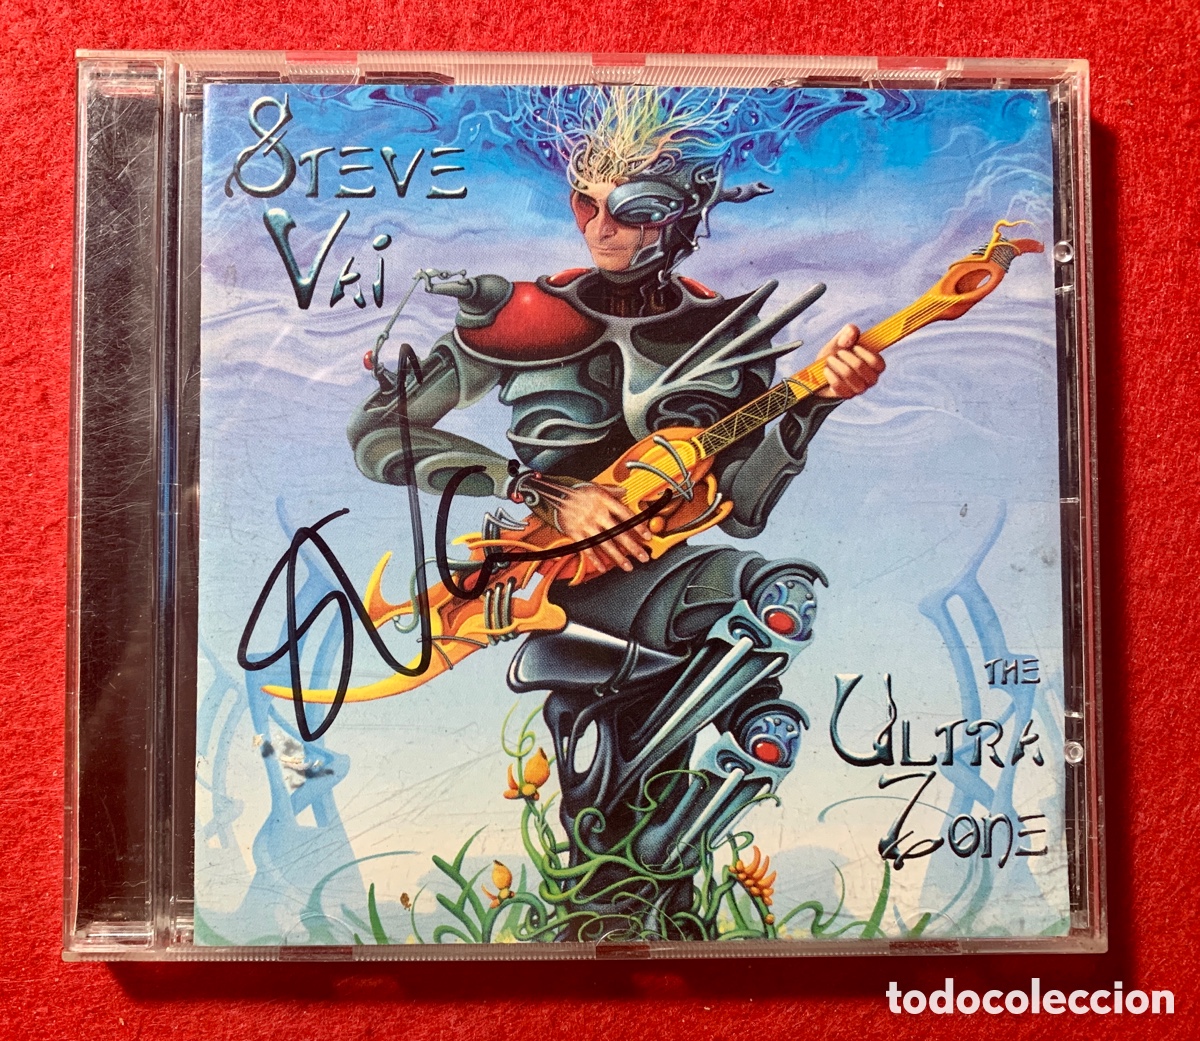 Steve Vai - The Ultra Zone, Releases